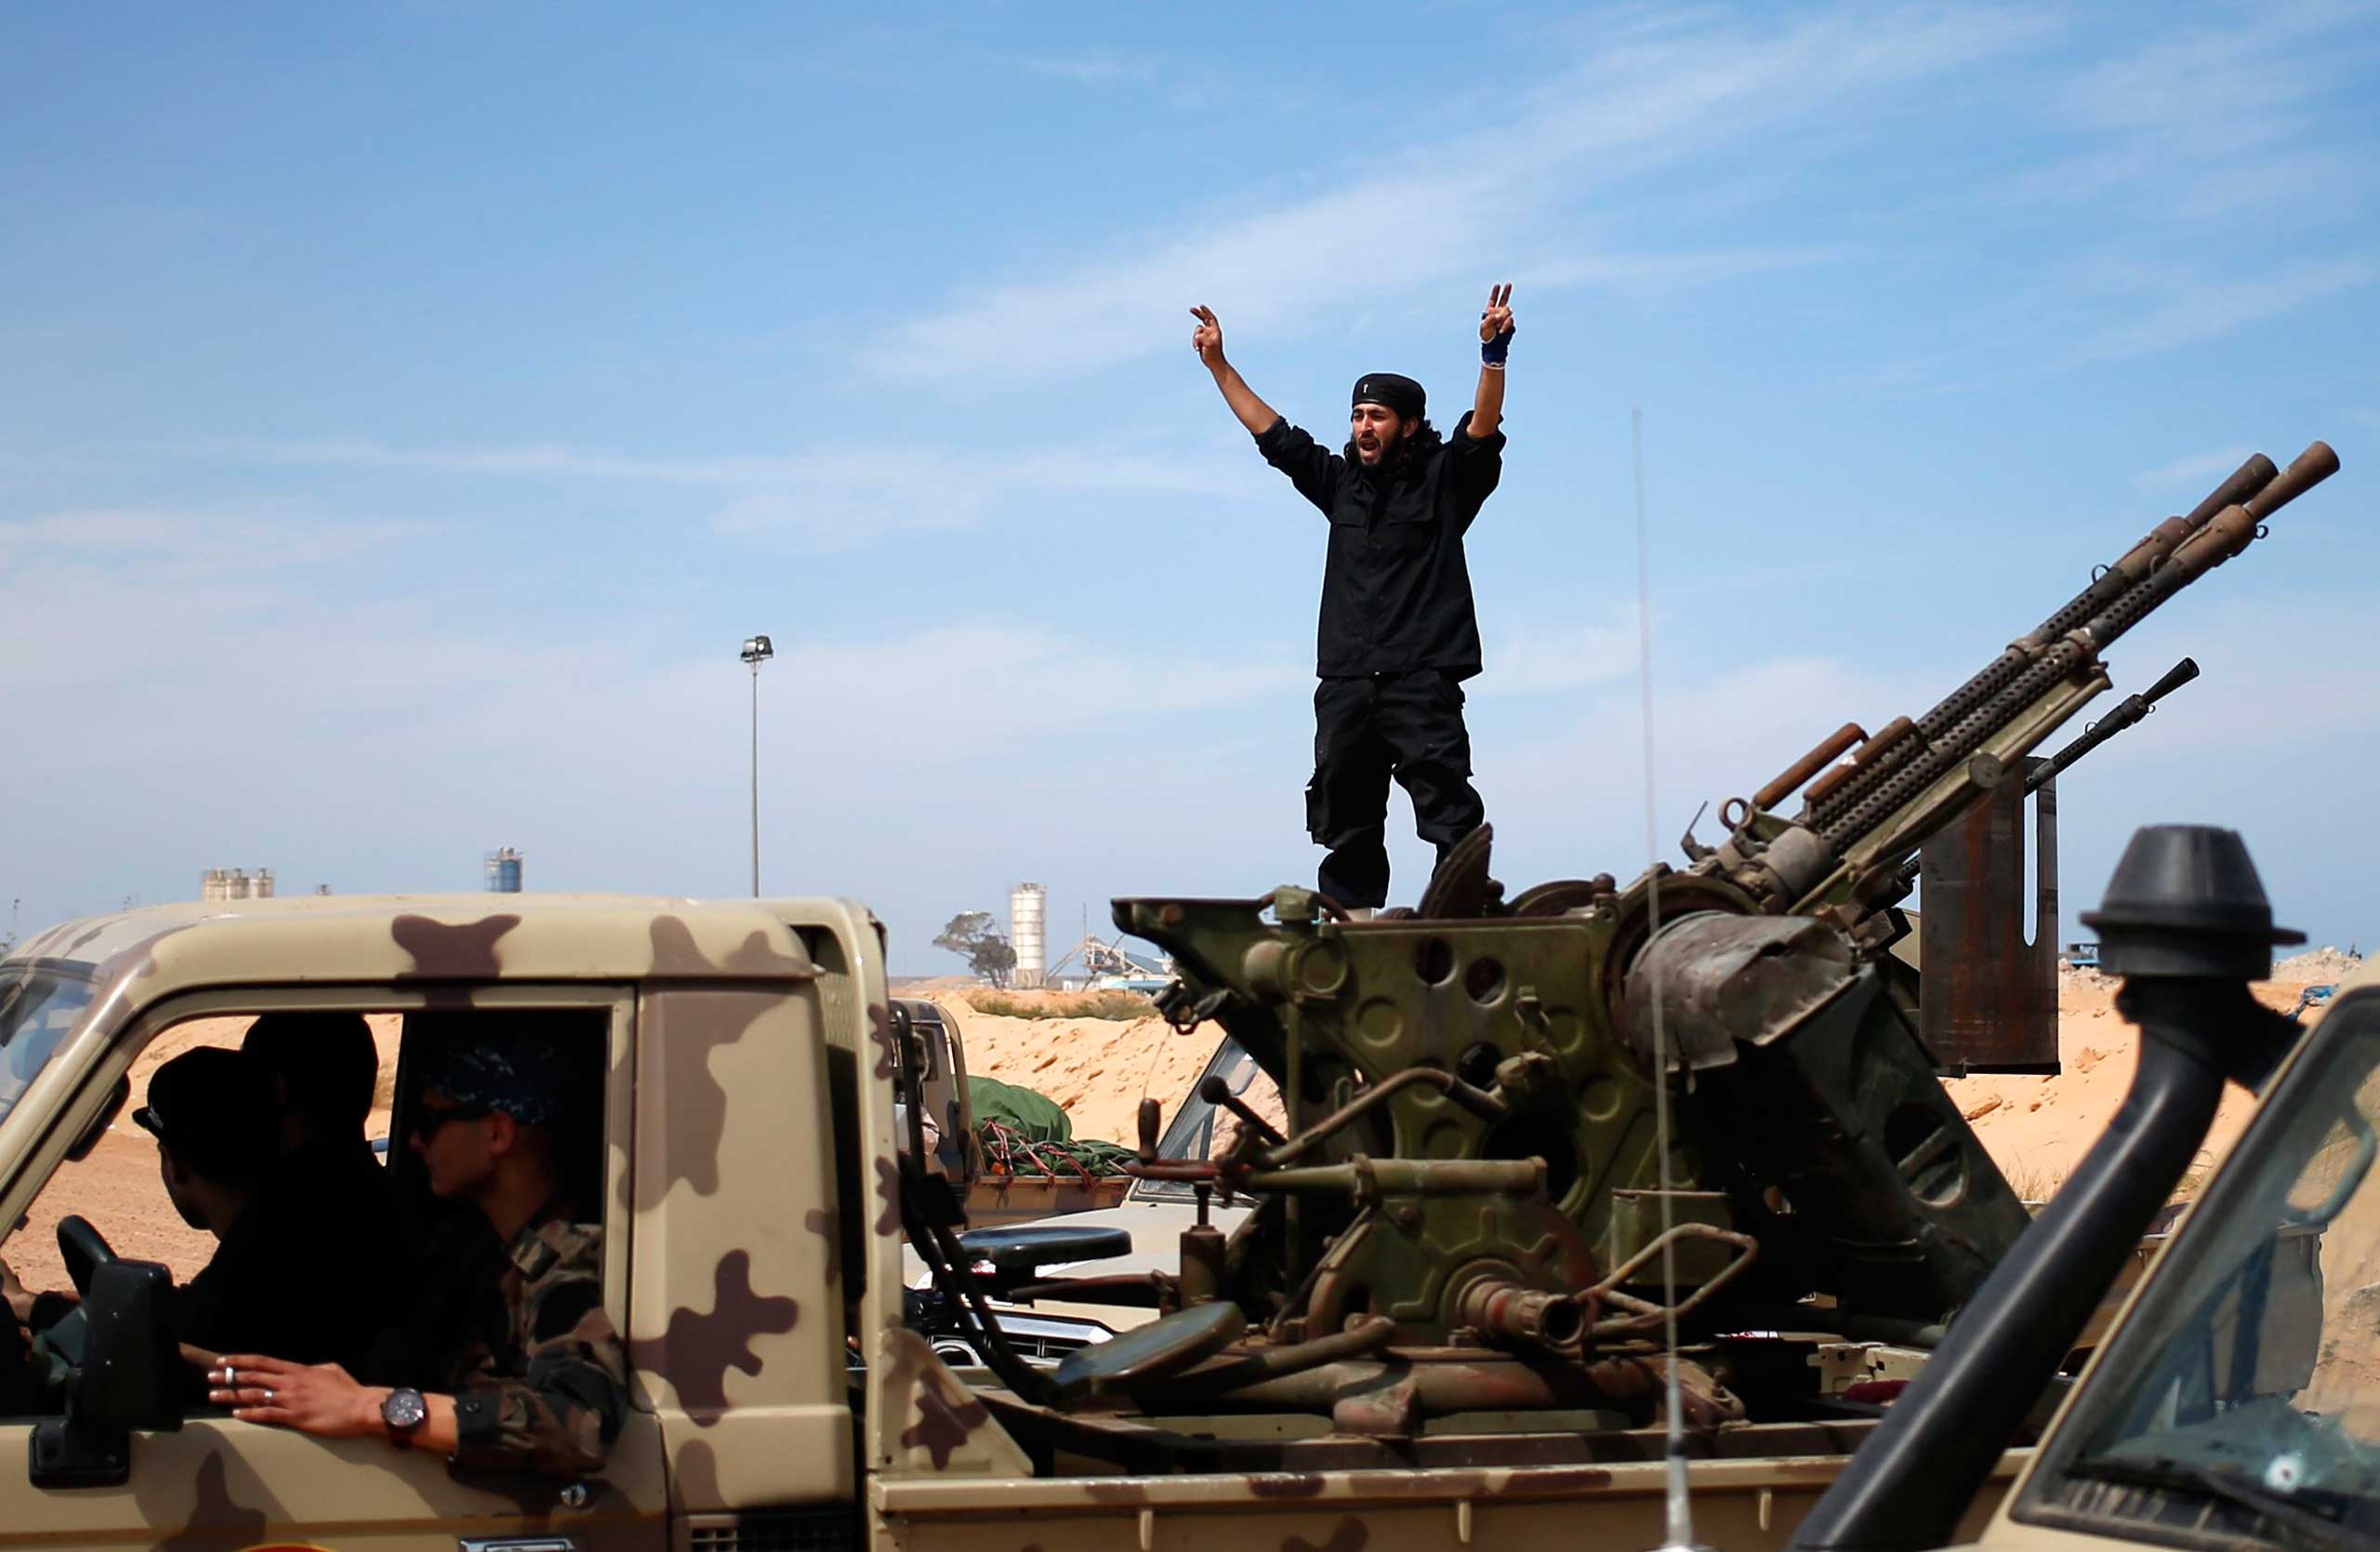 A fighter from Misrata shouts to his comrades as they move to fight ISIS militants near Sirte March 15, 2015. (Goran Tomasevic—Reuters)